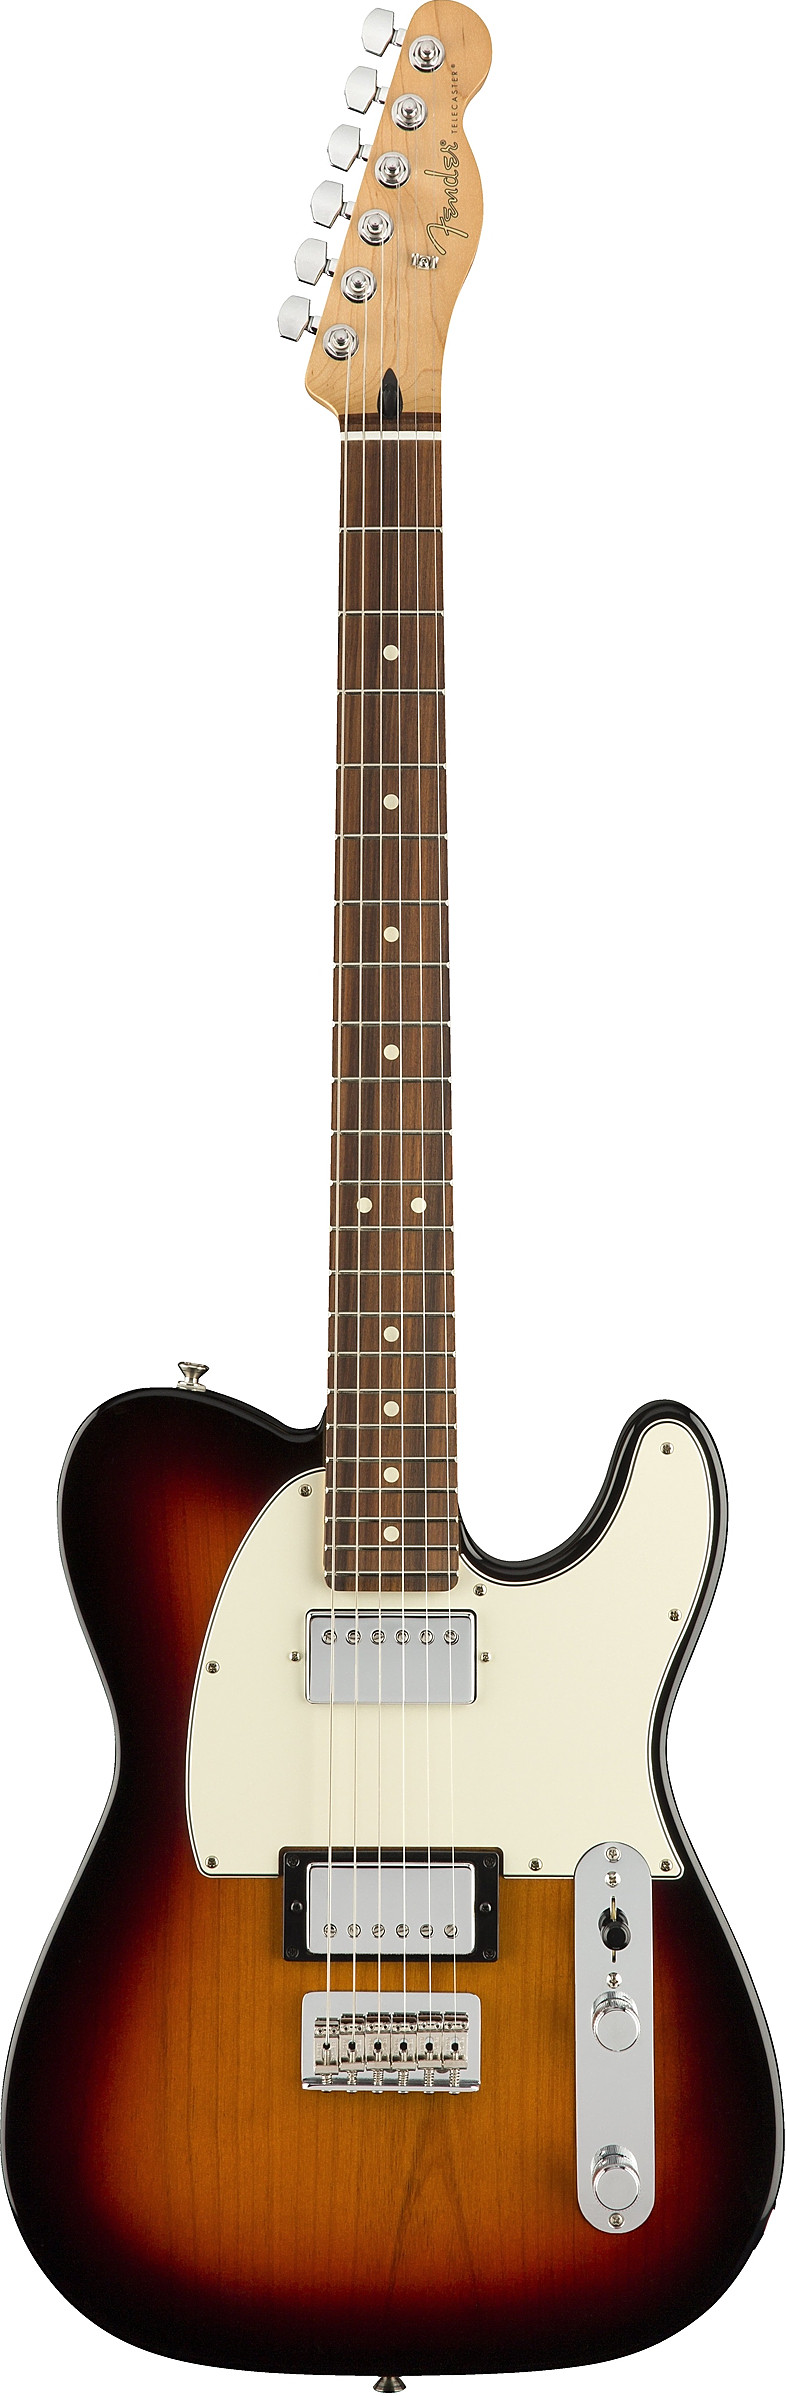 Player Telecaster� HH by Fender